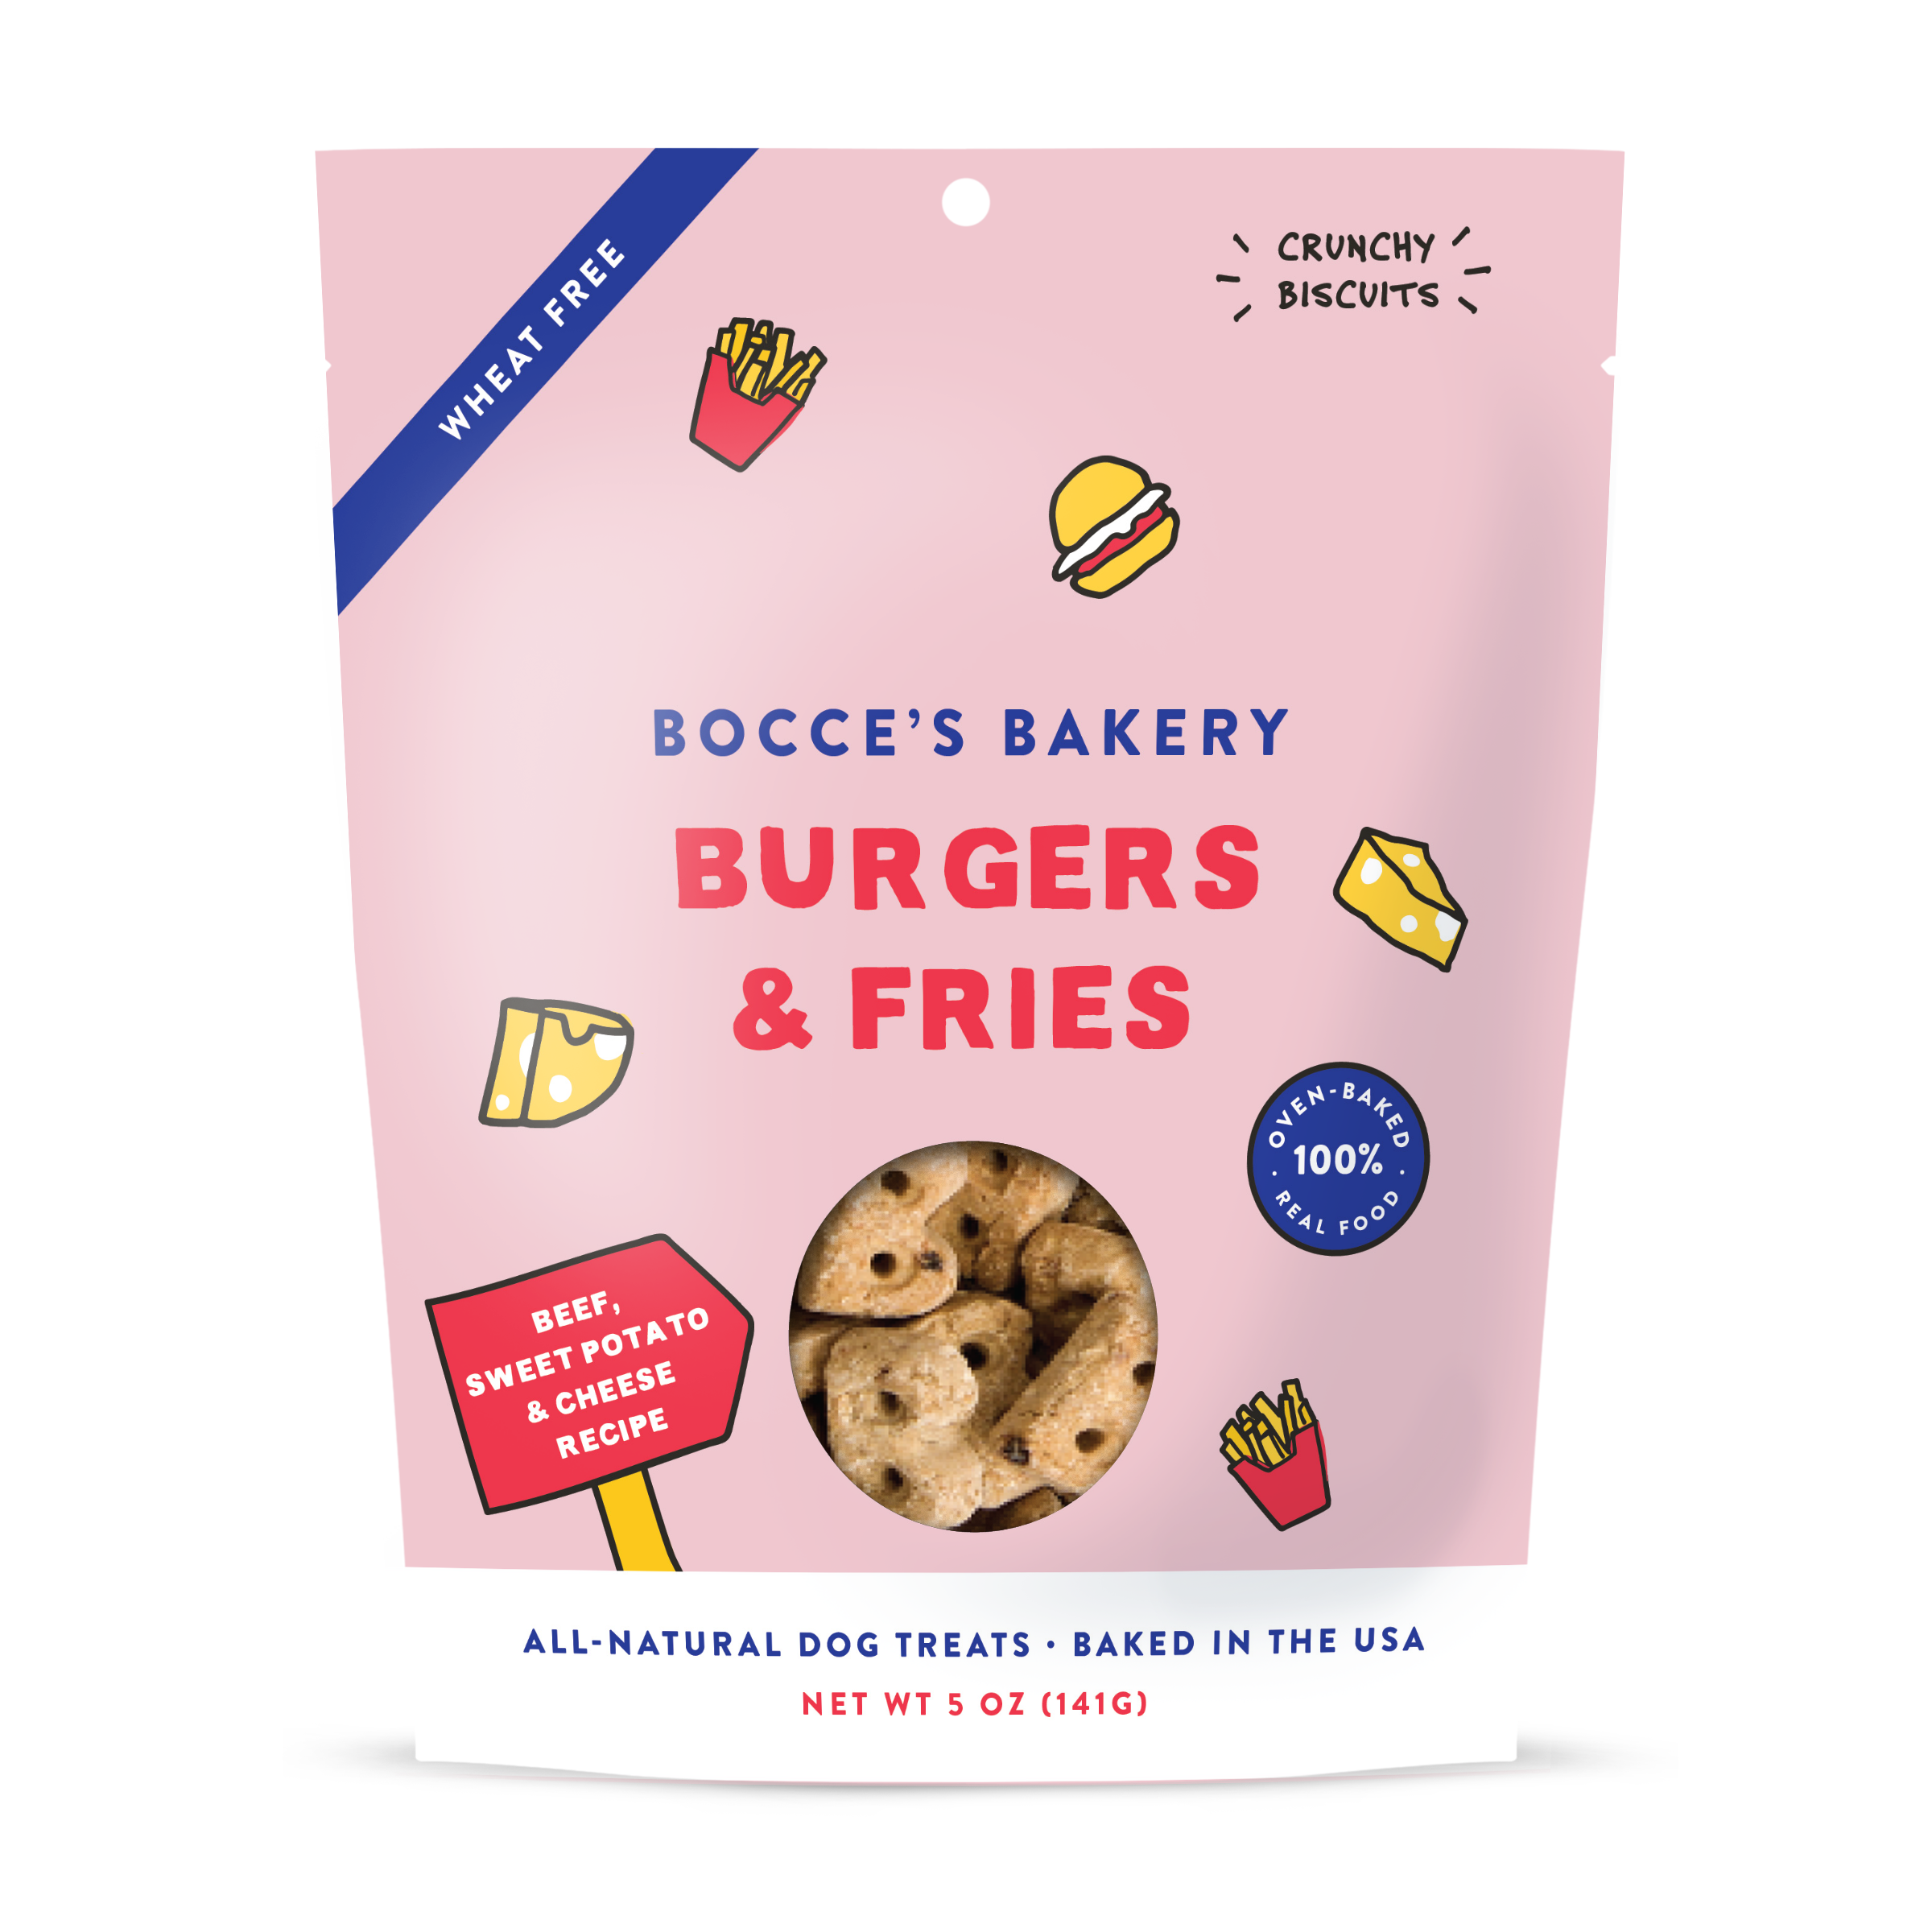 Bocce's Bakery - Burgers & Fries Biscuits